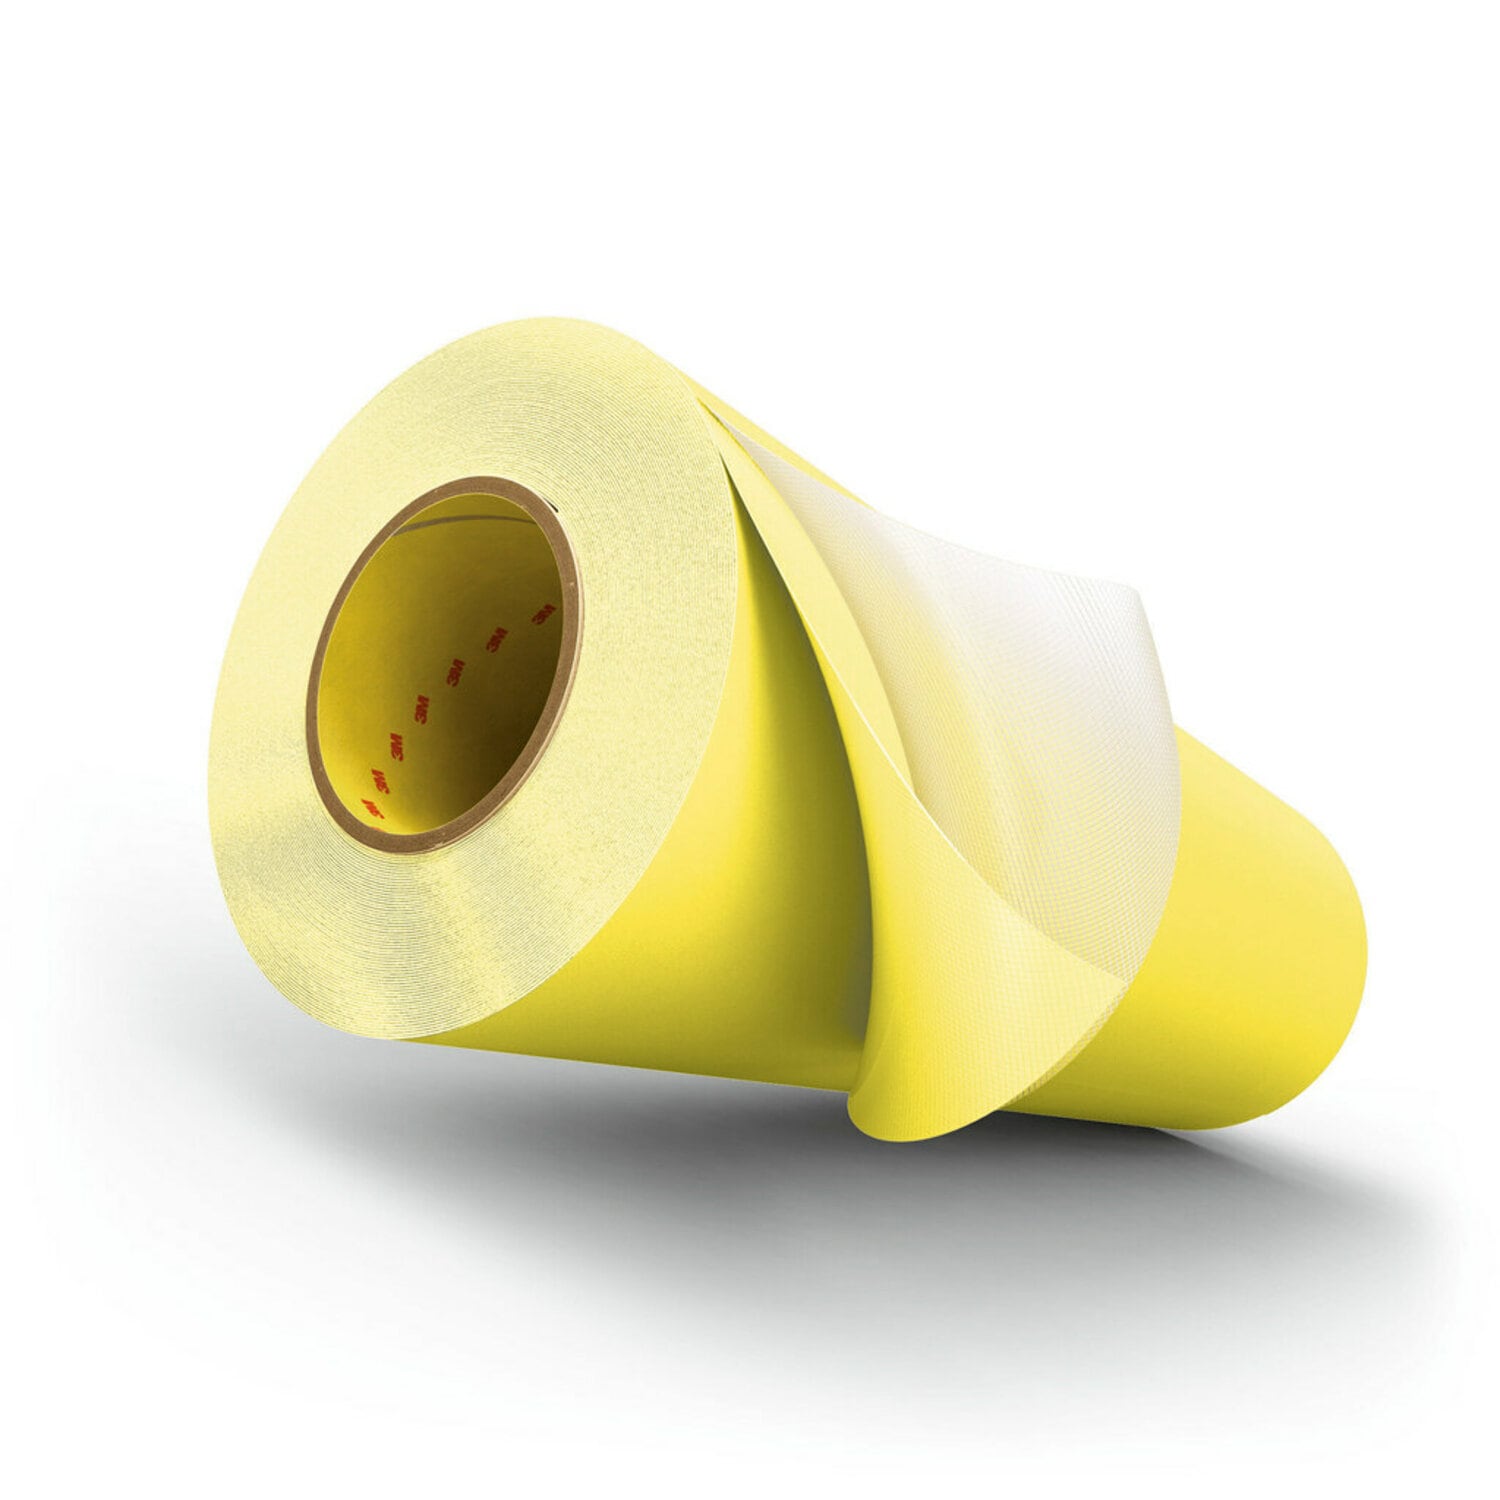 7000042751 - 3M Cushion-Mount Plus Plate Mounting Tape E1320, Yellow, 18 in x 25
yd, 20 mil, 1 roll per case